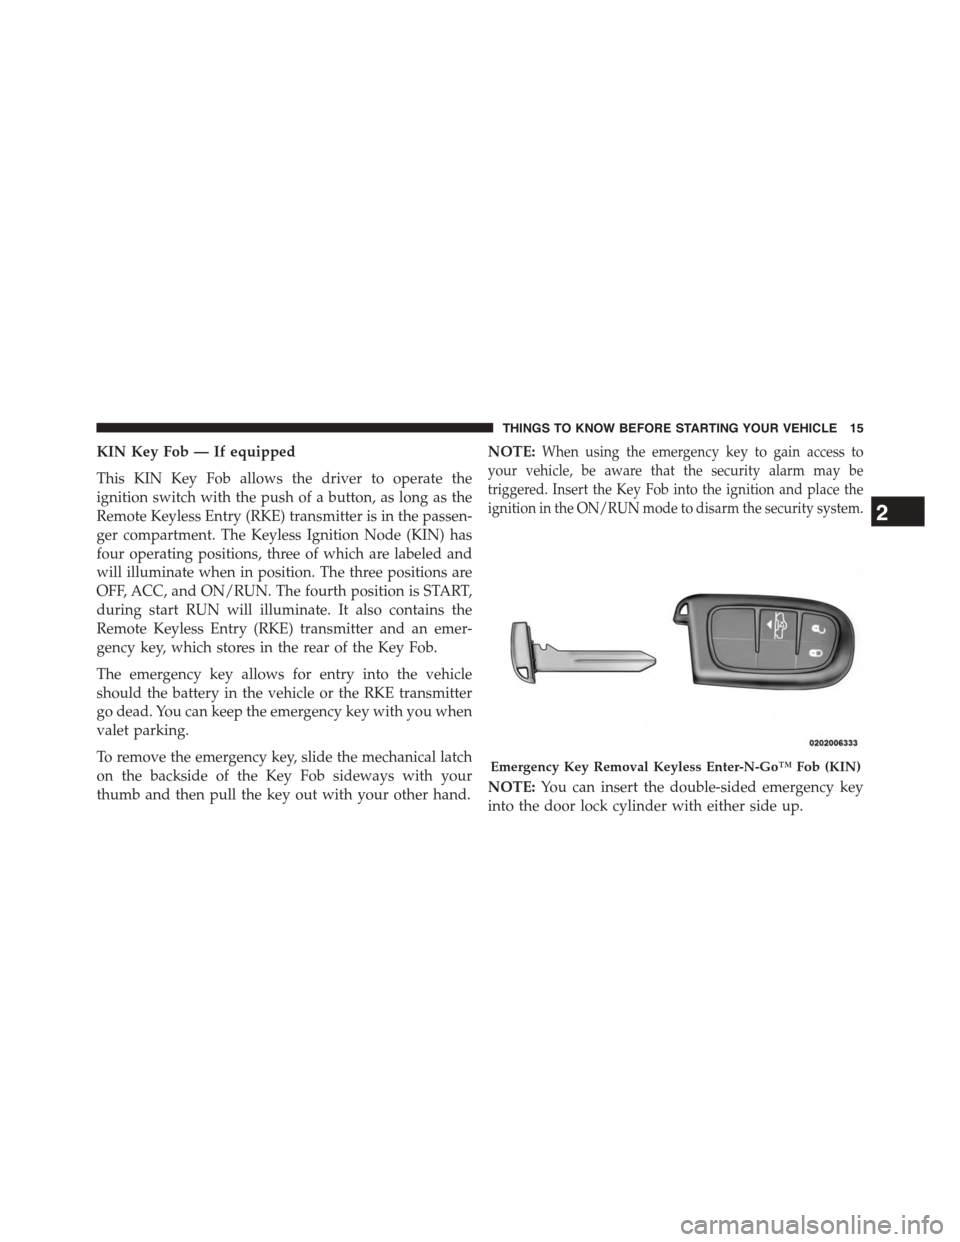 Ram 1500 2015  Owners Manual KIN Key Fob — If equipped
This KIN Key Fob allows the driver to operate the
ignition switch with the push of a button, as long as the
Remote Keyless Entry (RKE) transmitter is in the passen-
ger com